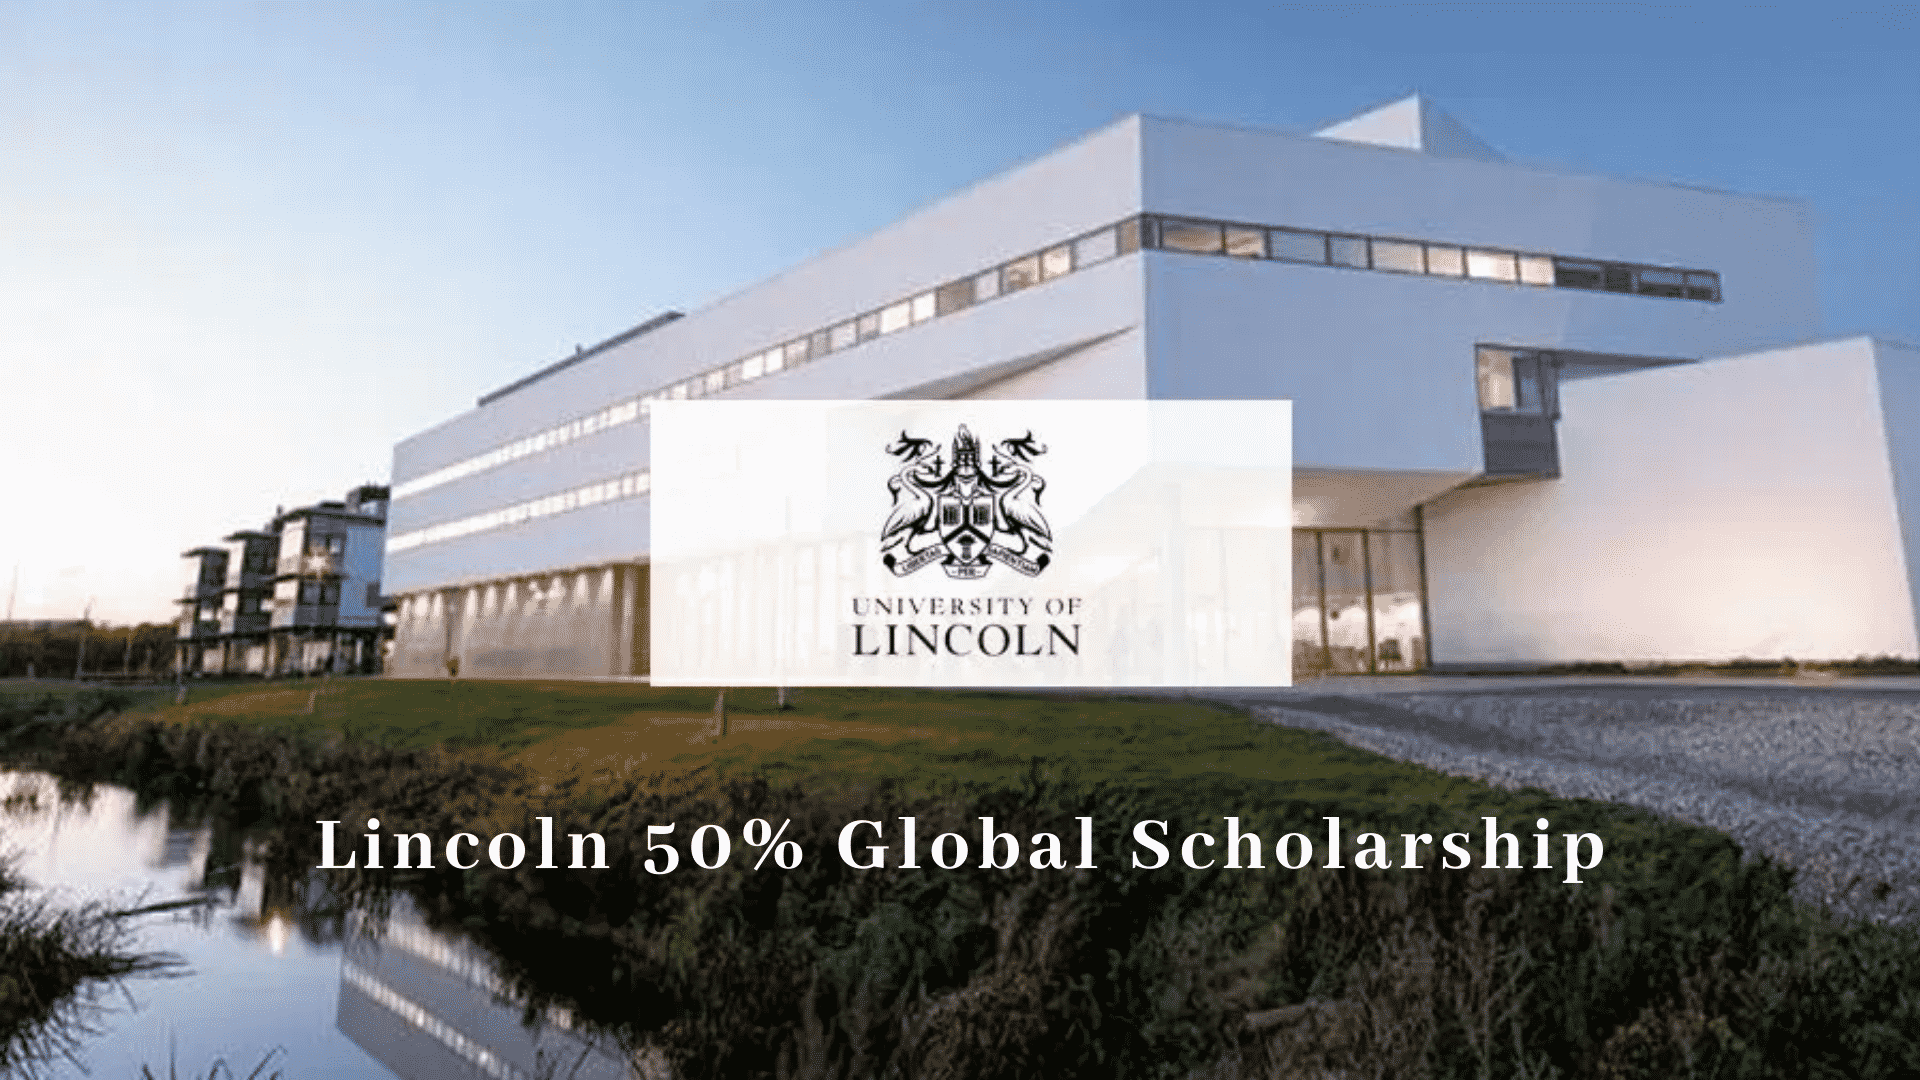 50% Global Scholarship at the University of Lincoln